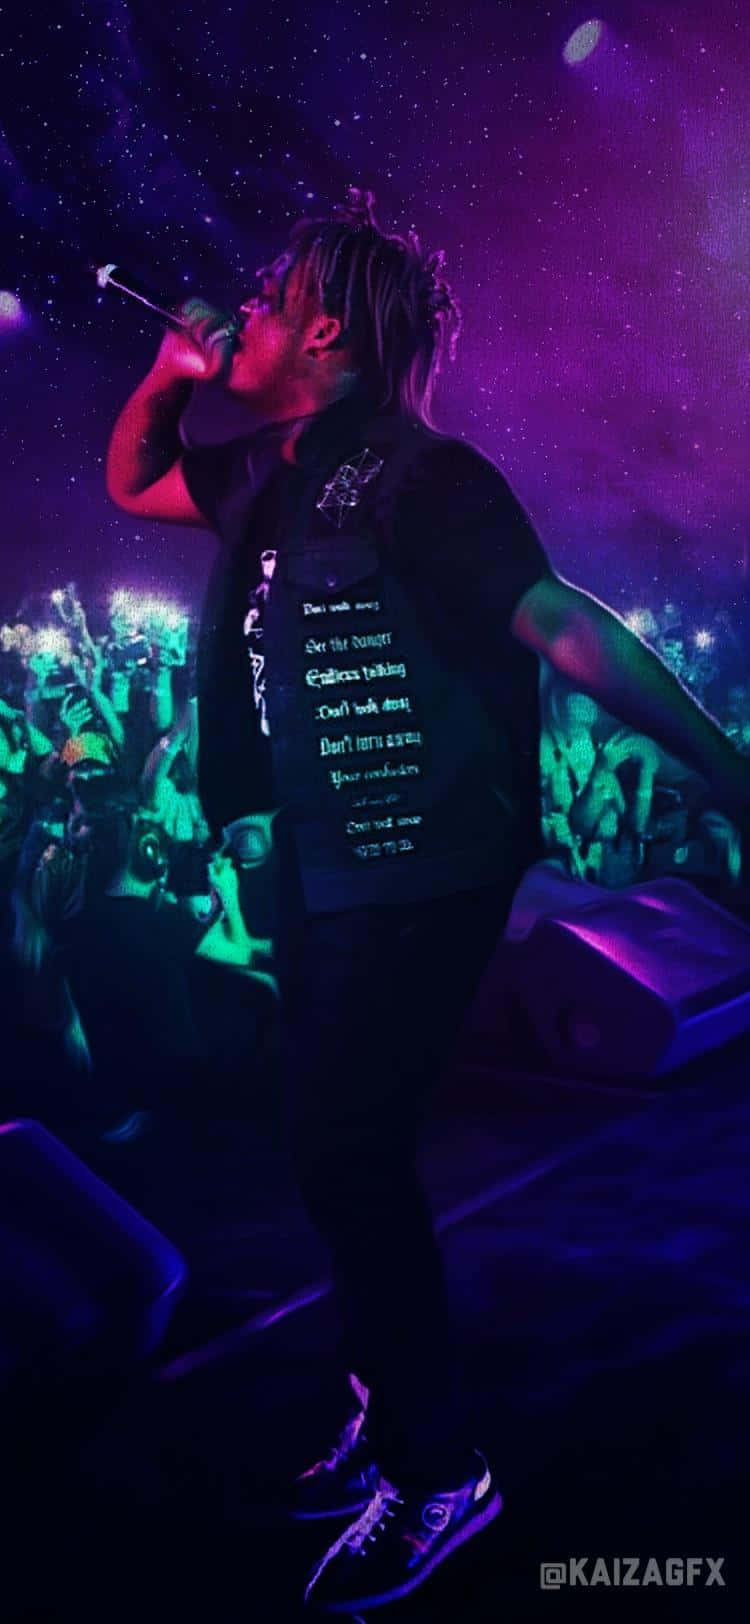 Juice Wrld lights up the stage with a live performance Wallpaper